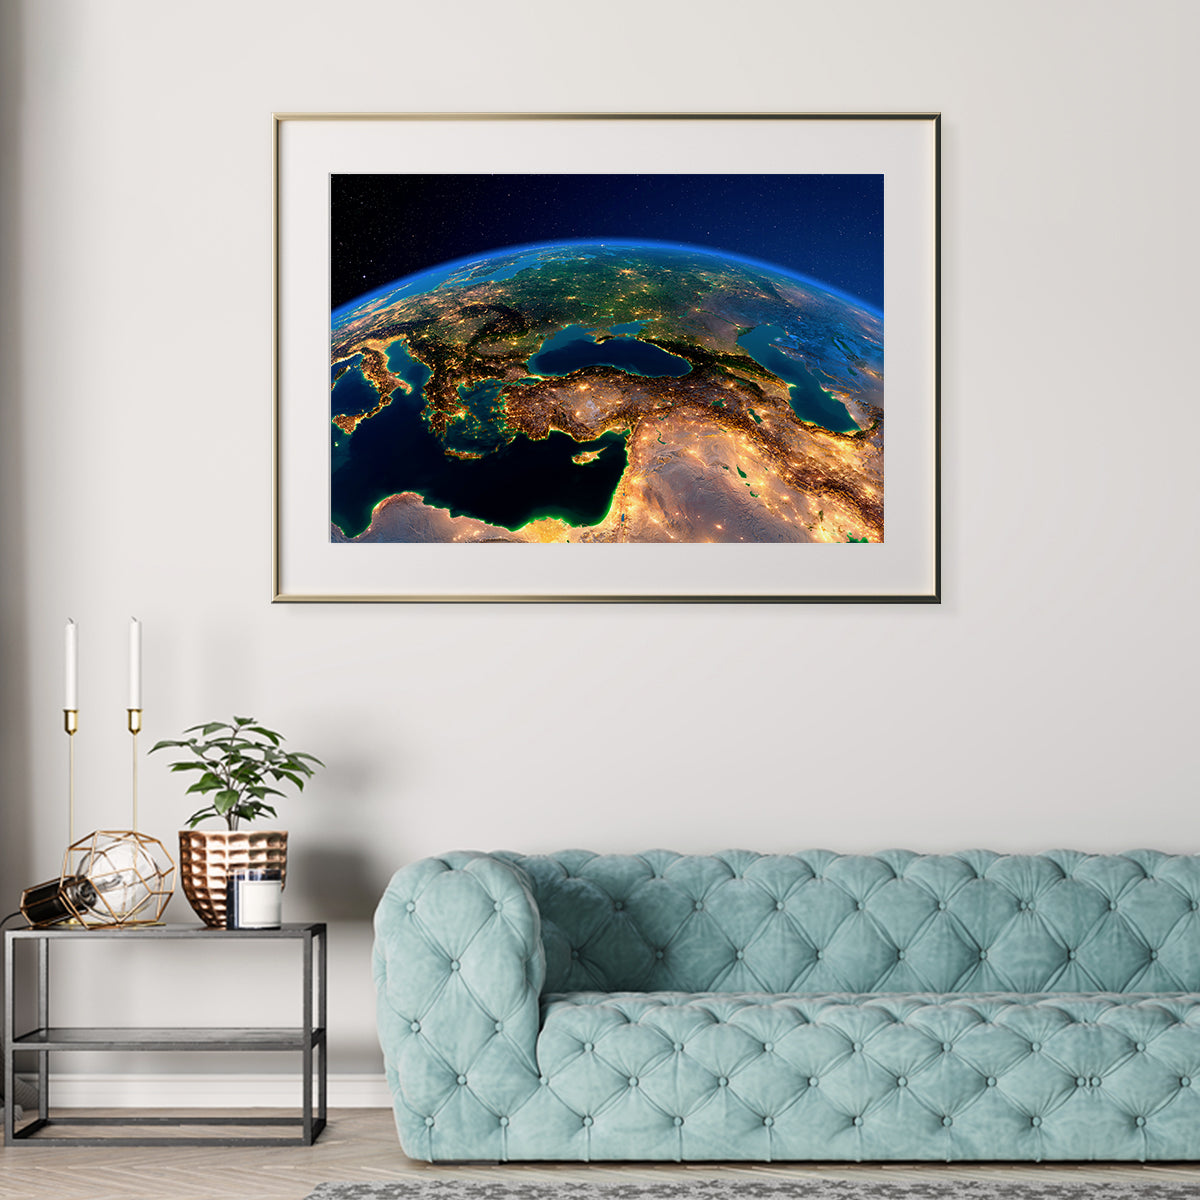 Planet Earth with Night City Lights Poster Design-Horizontal Posters NOT FRAMED-CetArt-10″x8″ inches-CetArt